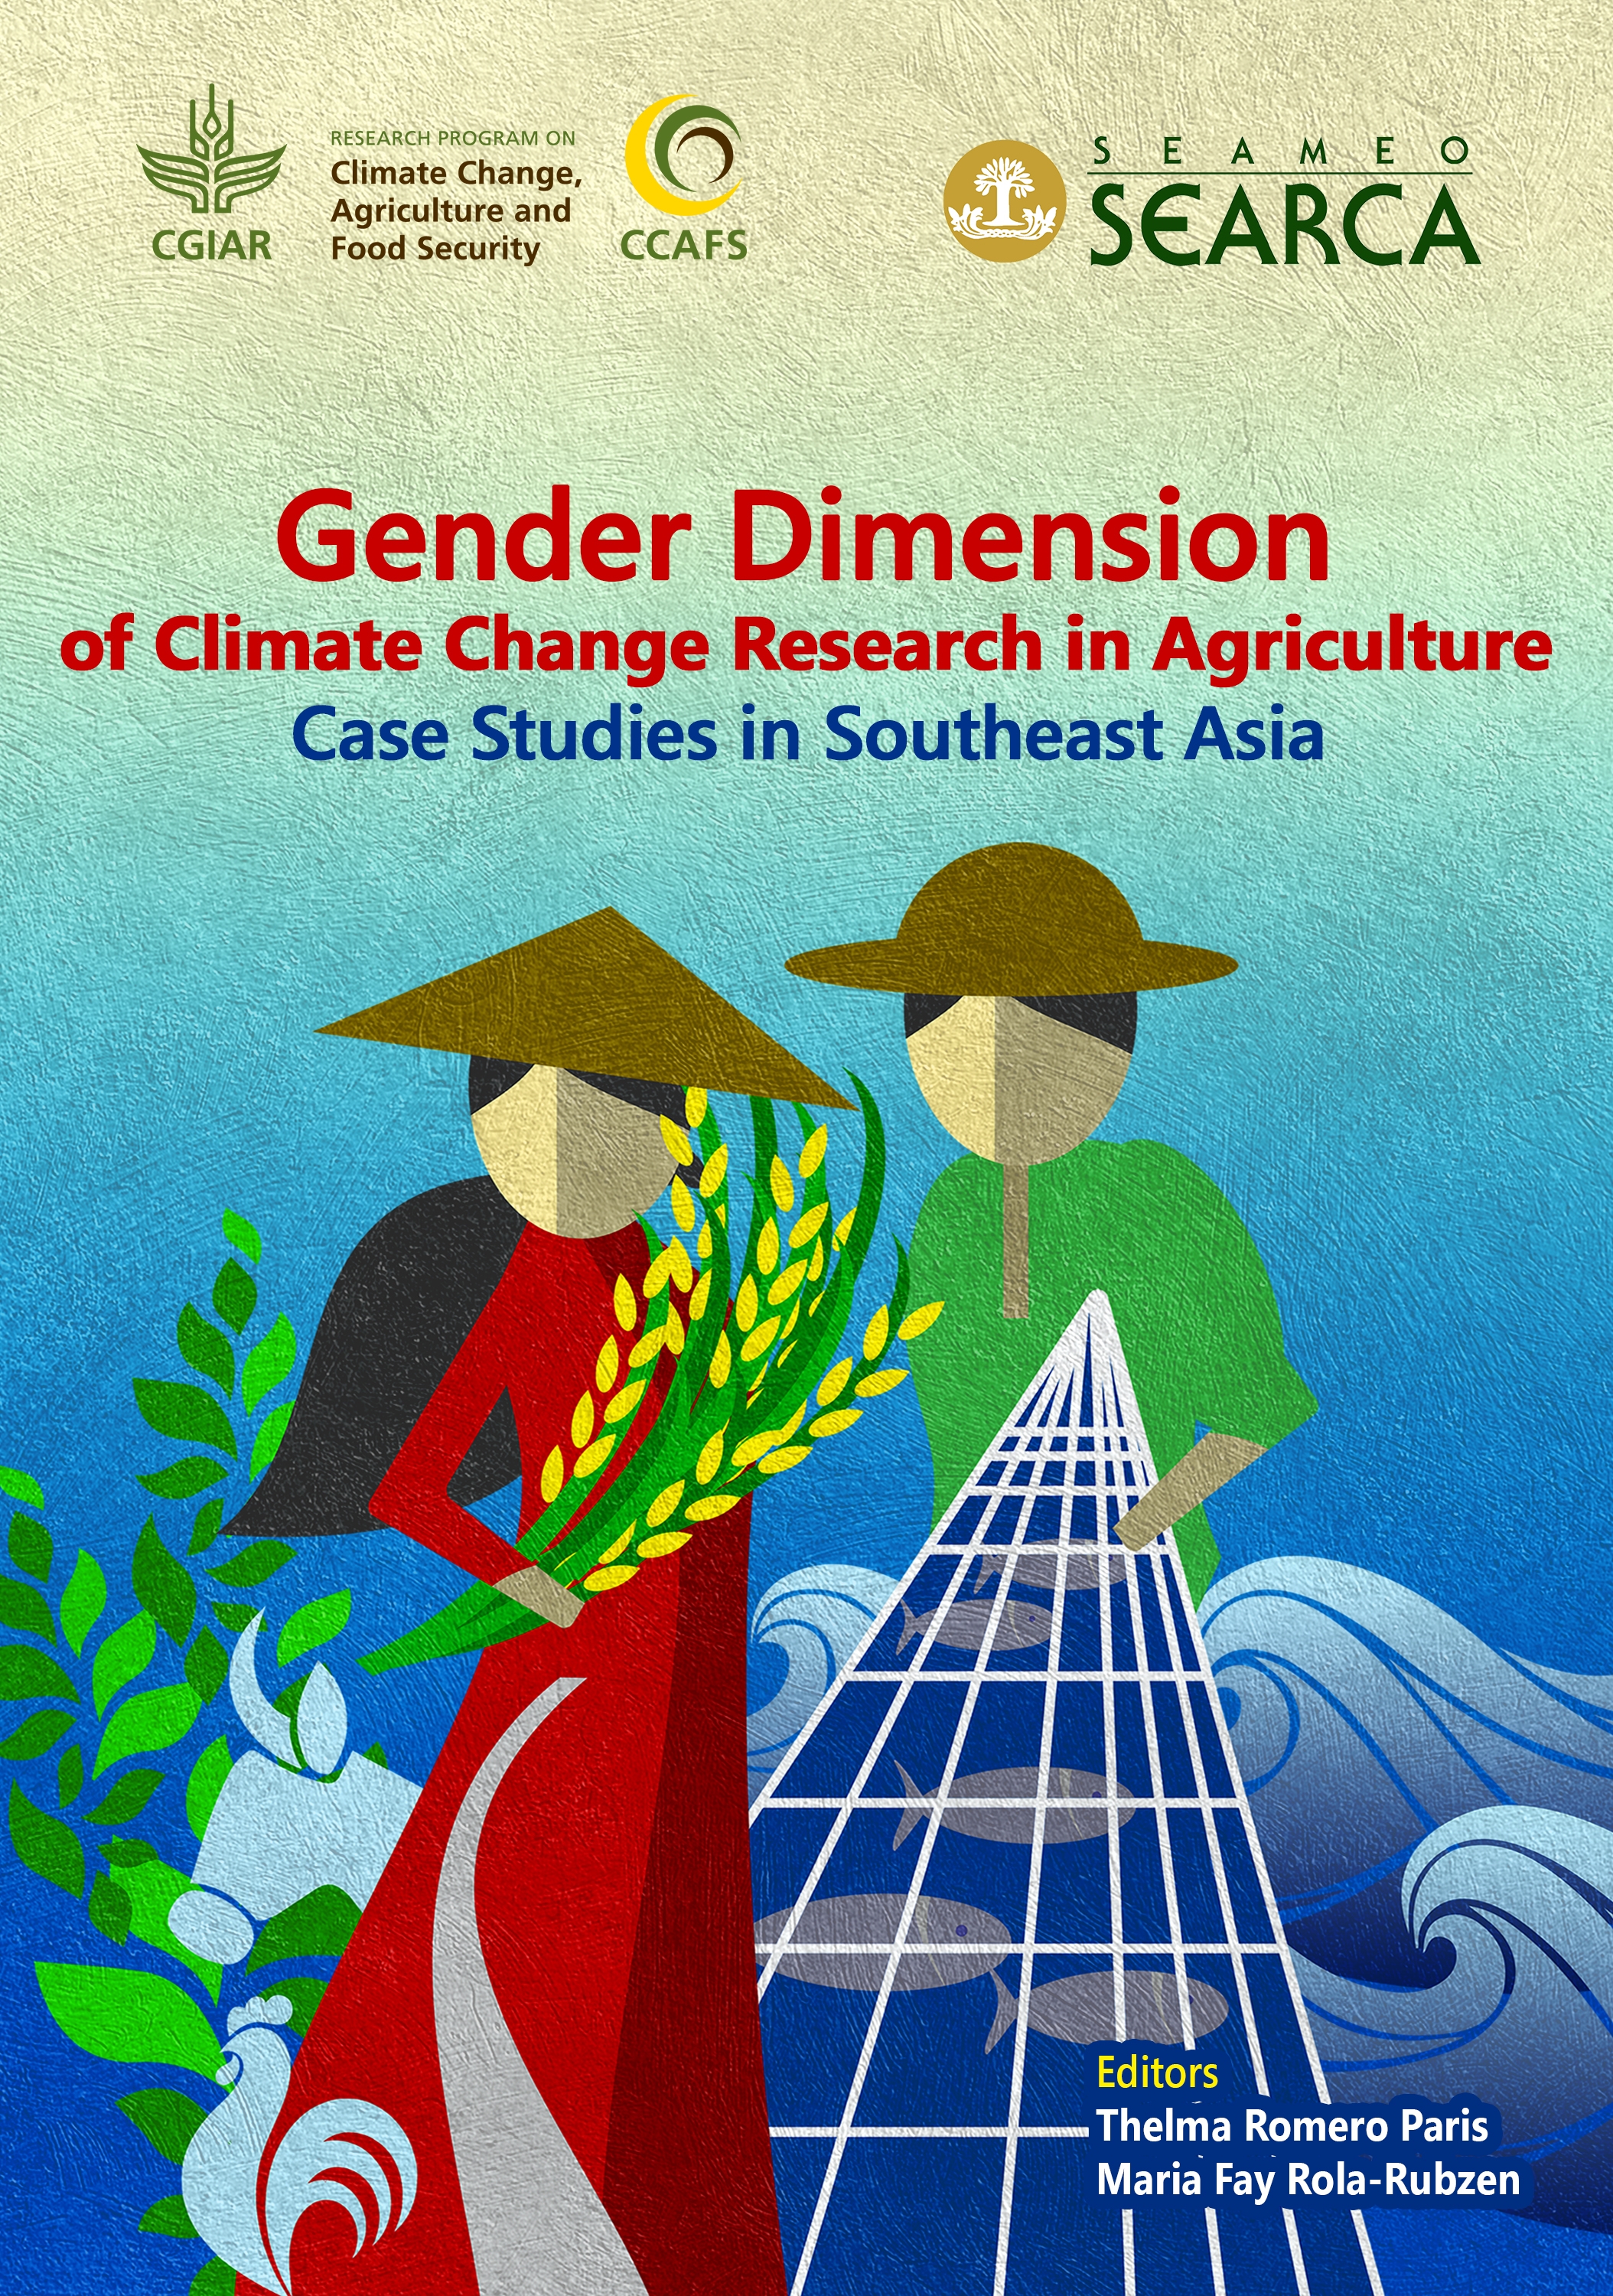 Gender Dimension of Climate Change Research in Agriculture: Case Studies in Southeast Asia